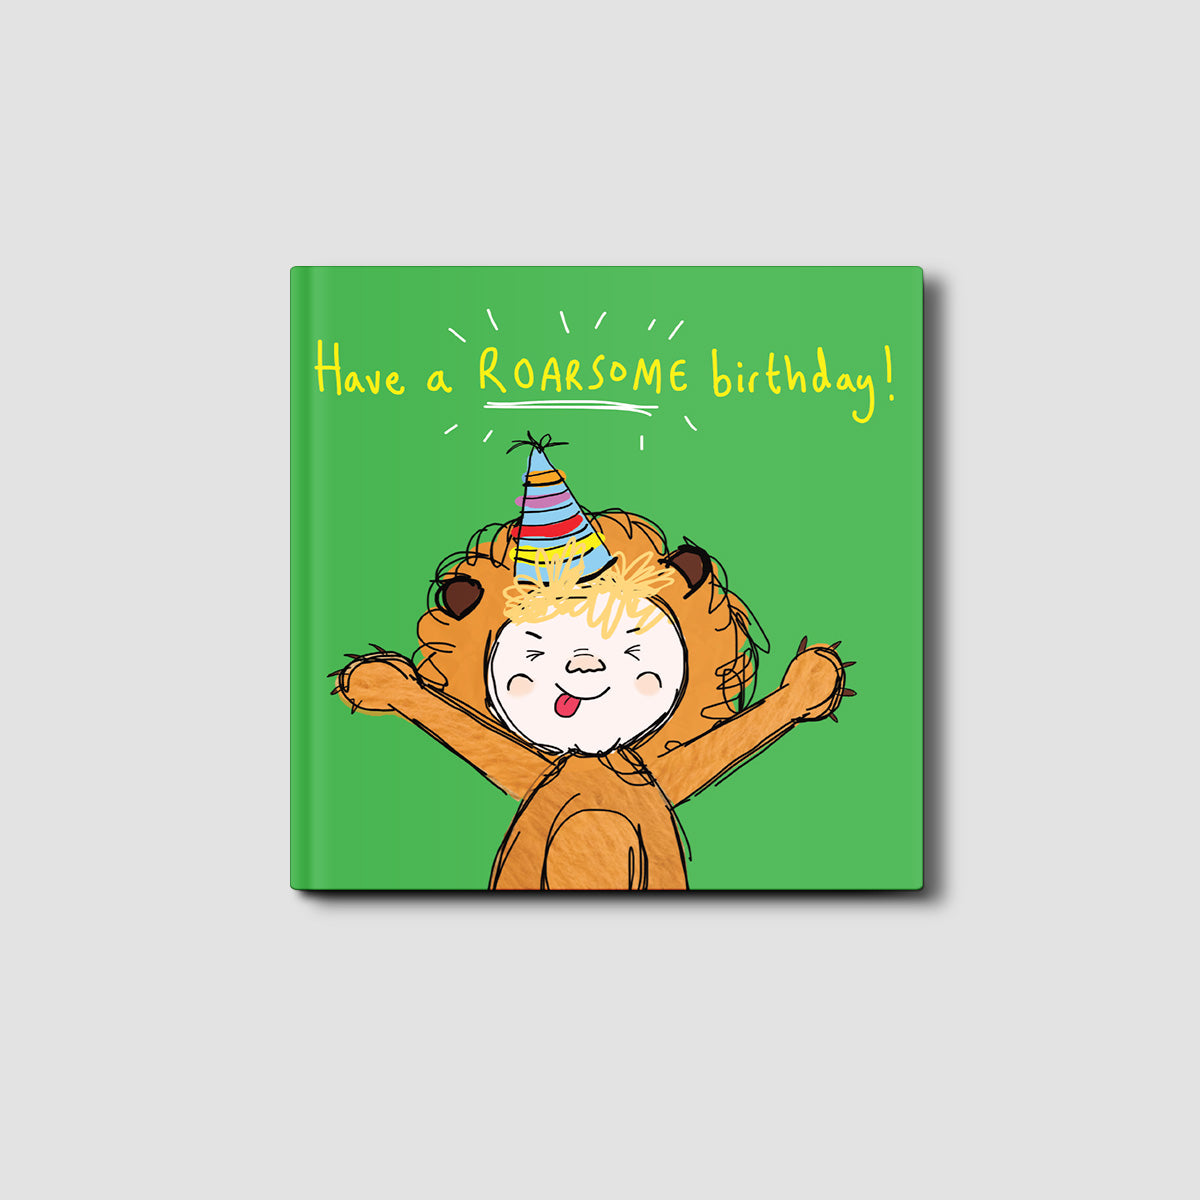 Have a Roarsome Birthday Silly Eric Card